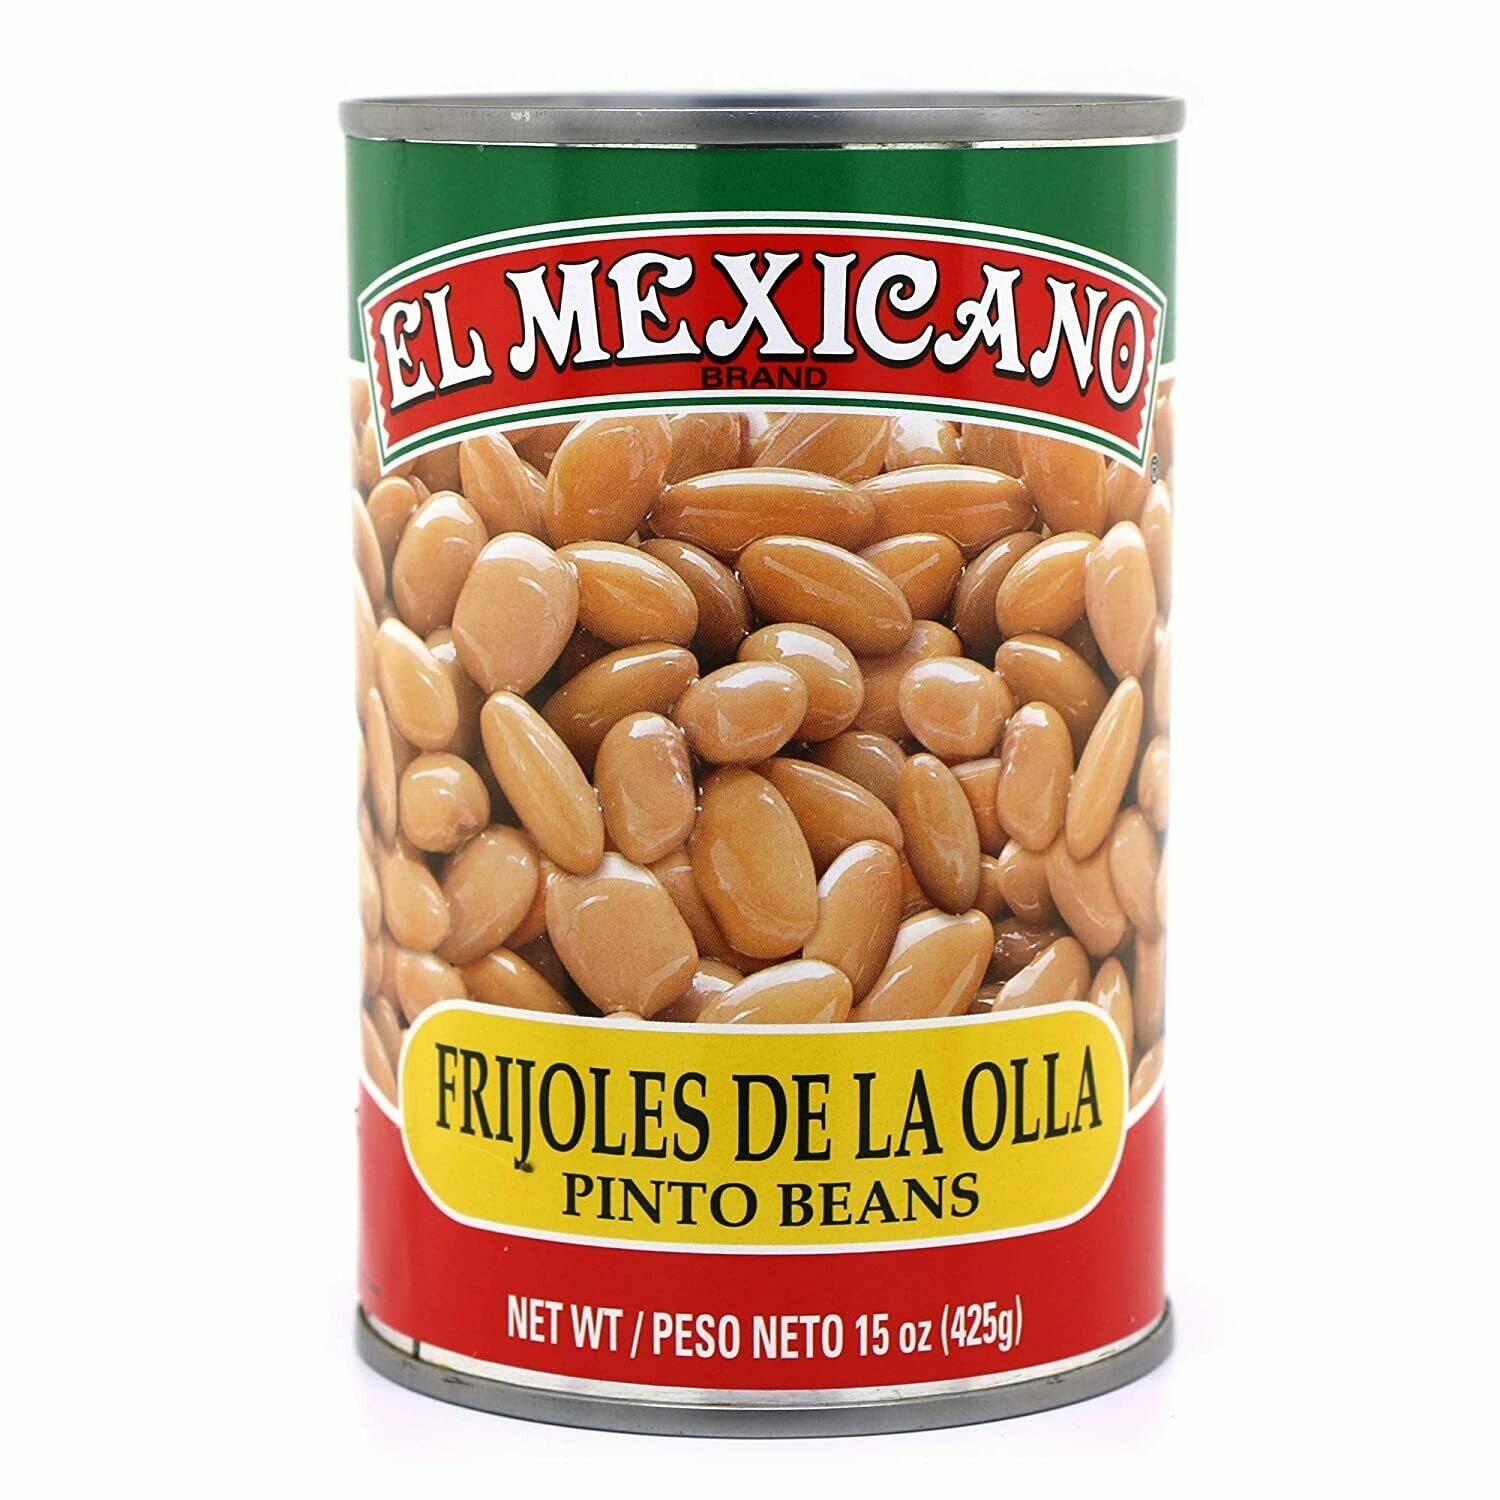 El Mexicano Canned Whole Pinto Beans - 15oz